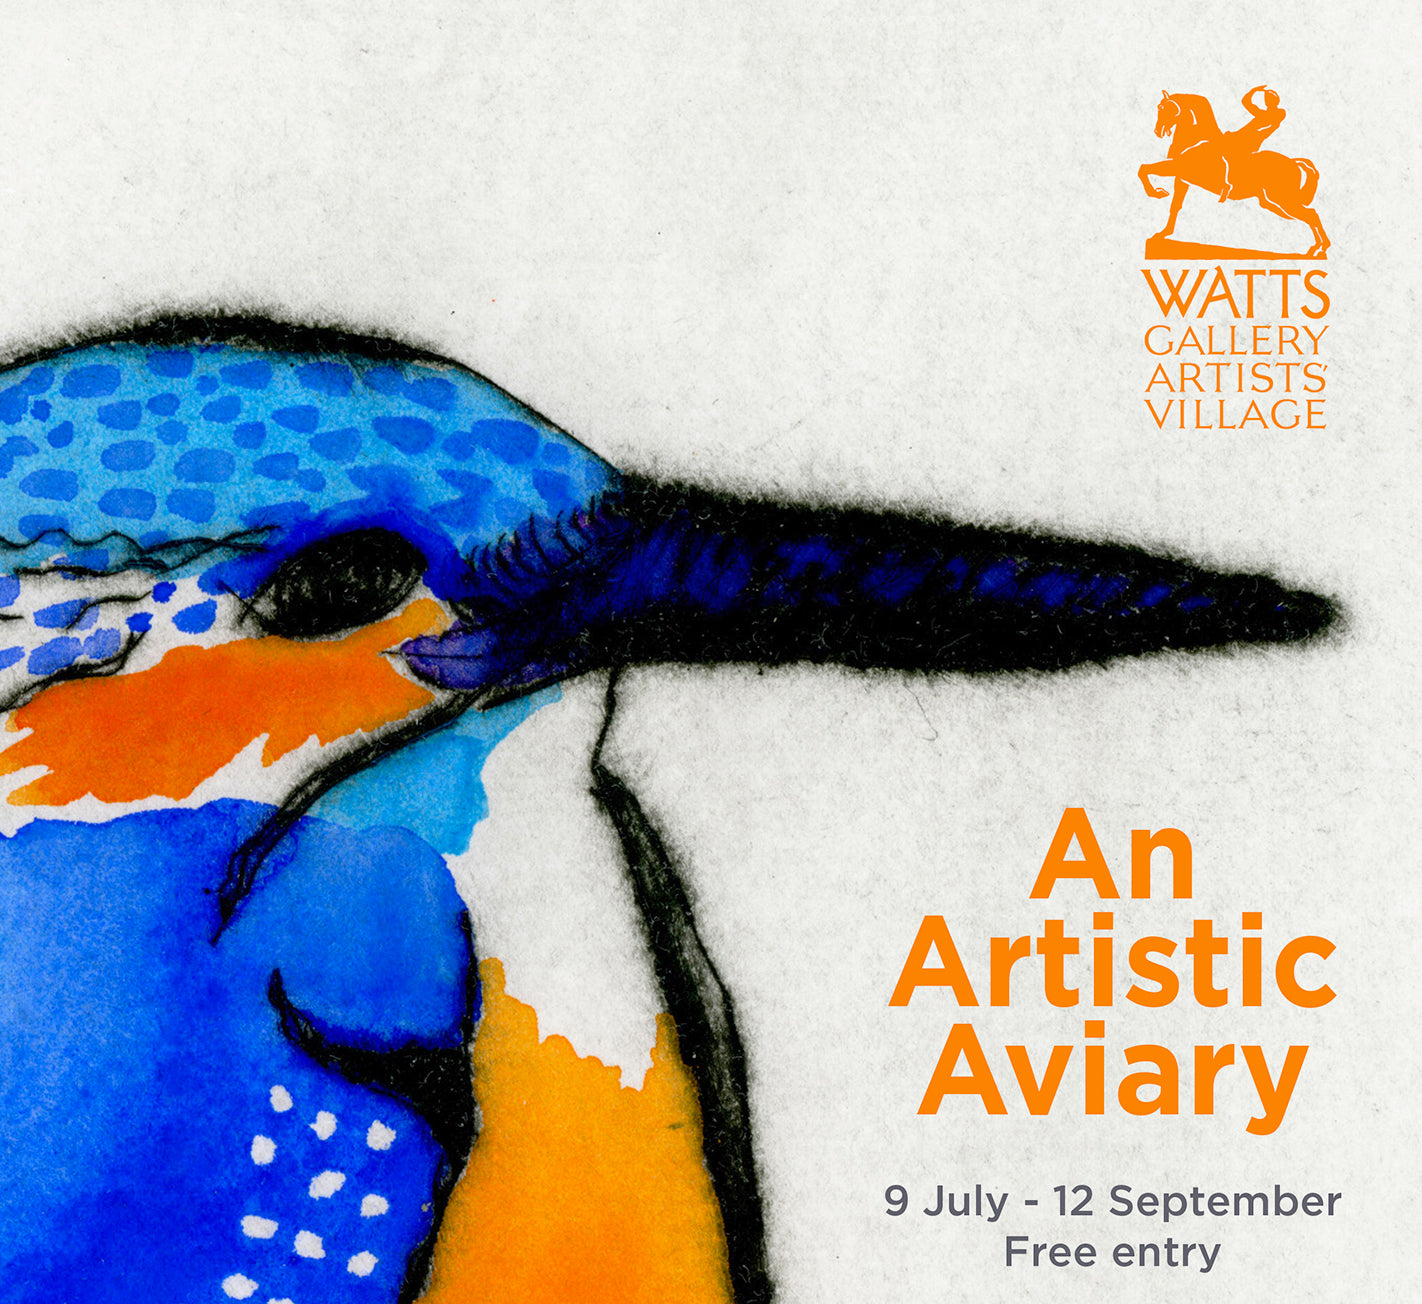 Detail of the exhibition poster for 'An Artistic Aviary' at the Watts Contemporary Gallery, featuring Richard Spare's Perching Kingfisher